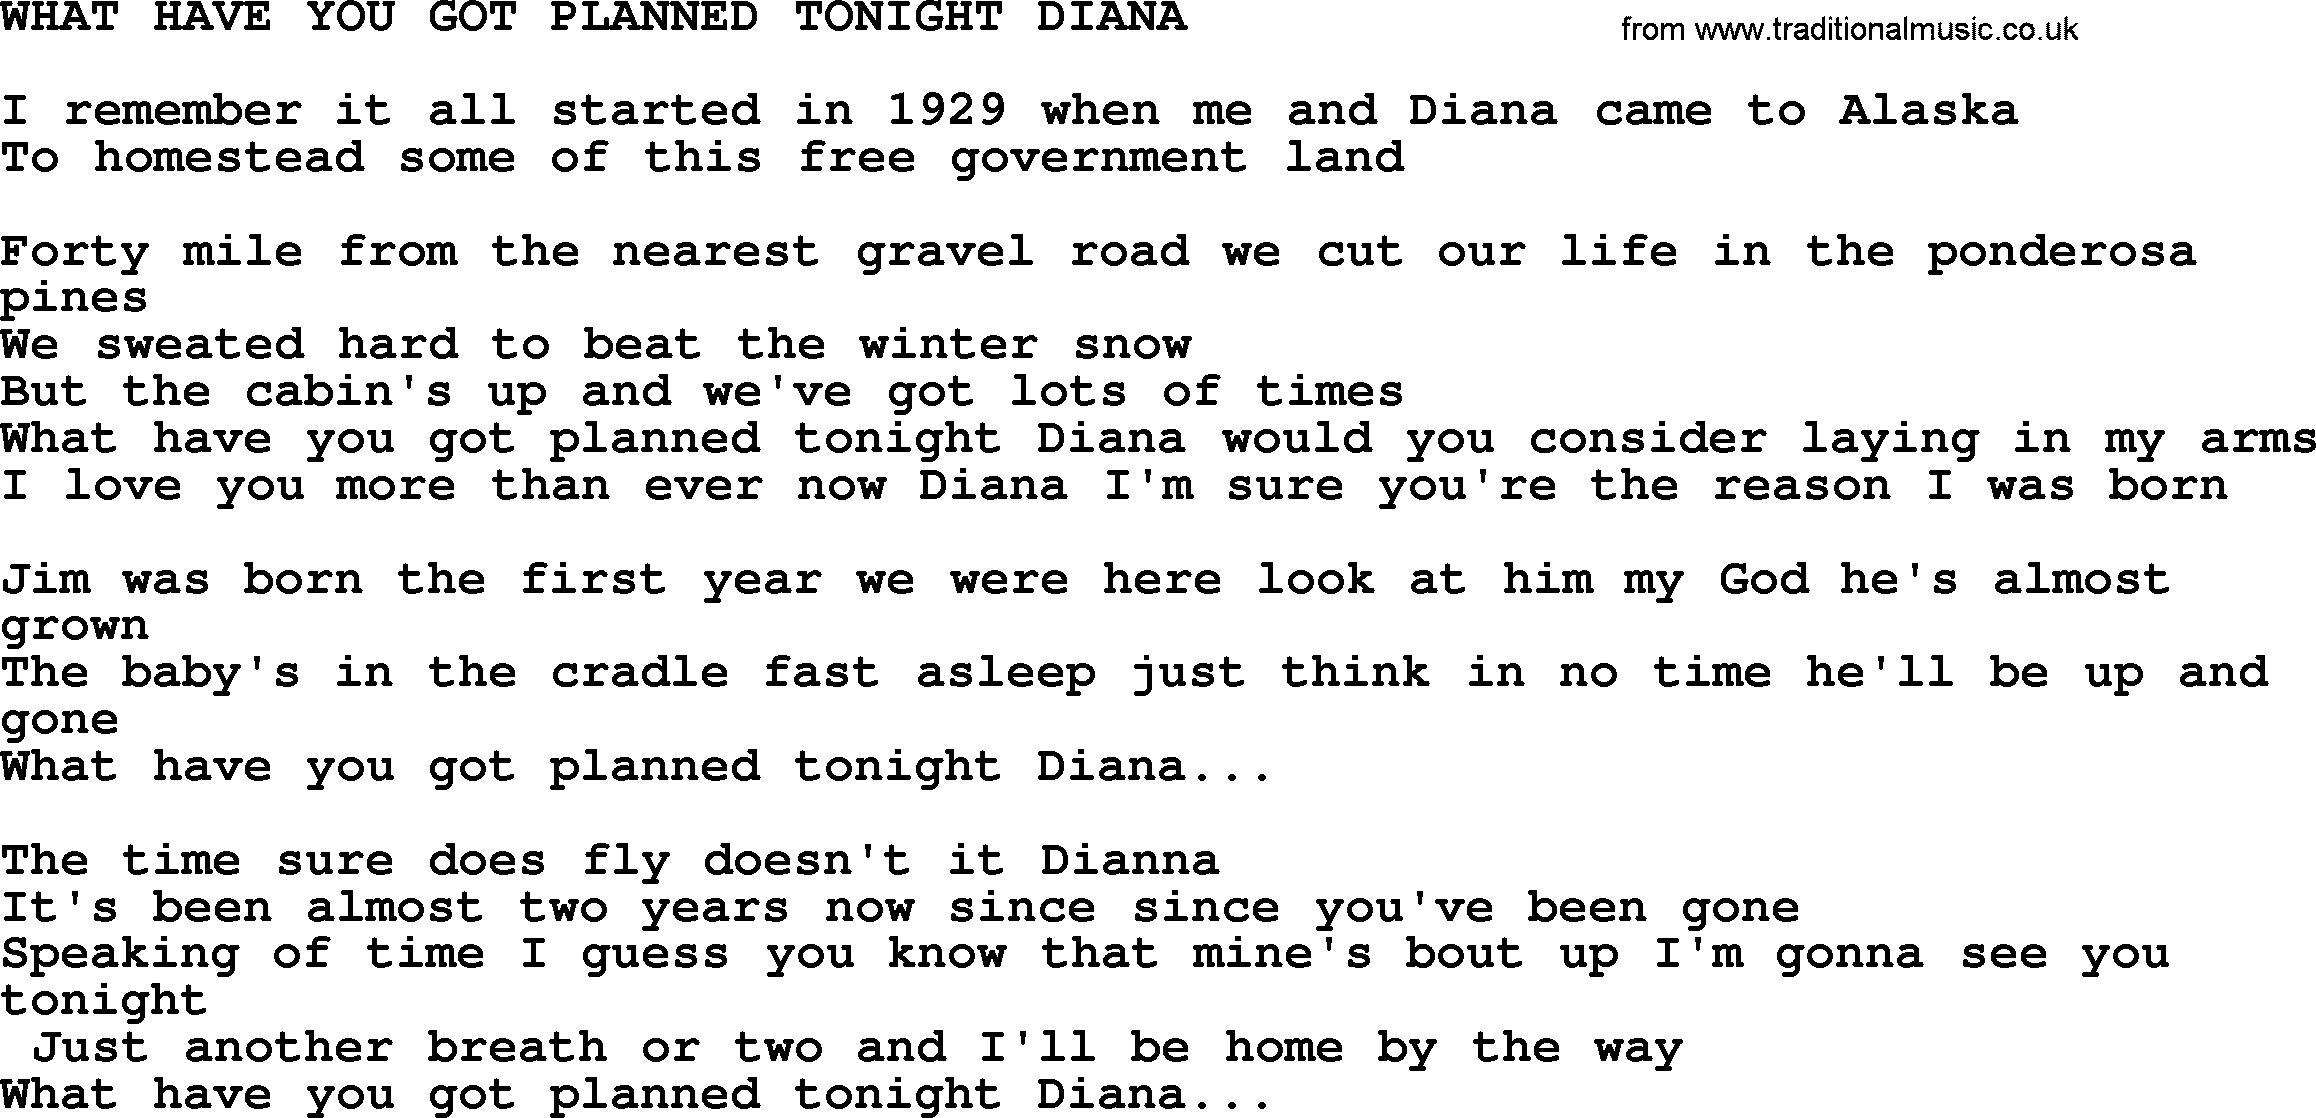 Merle Haggard song: What Have You Got Planned Tonight Diana, lyrics.